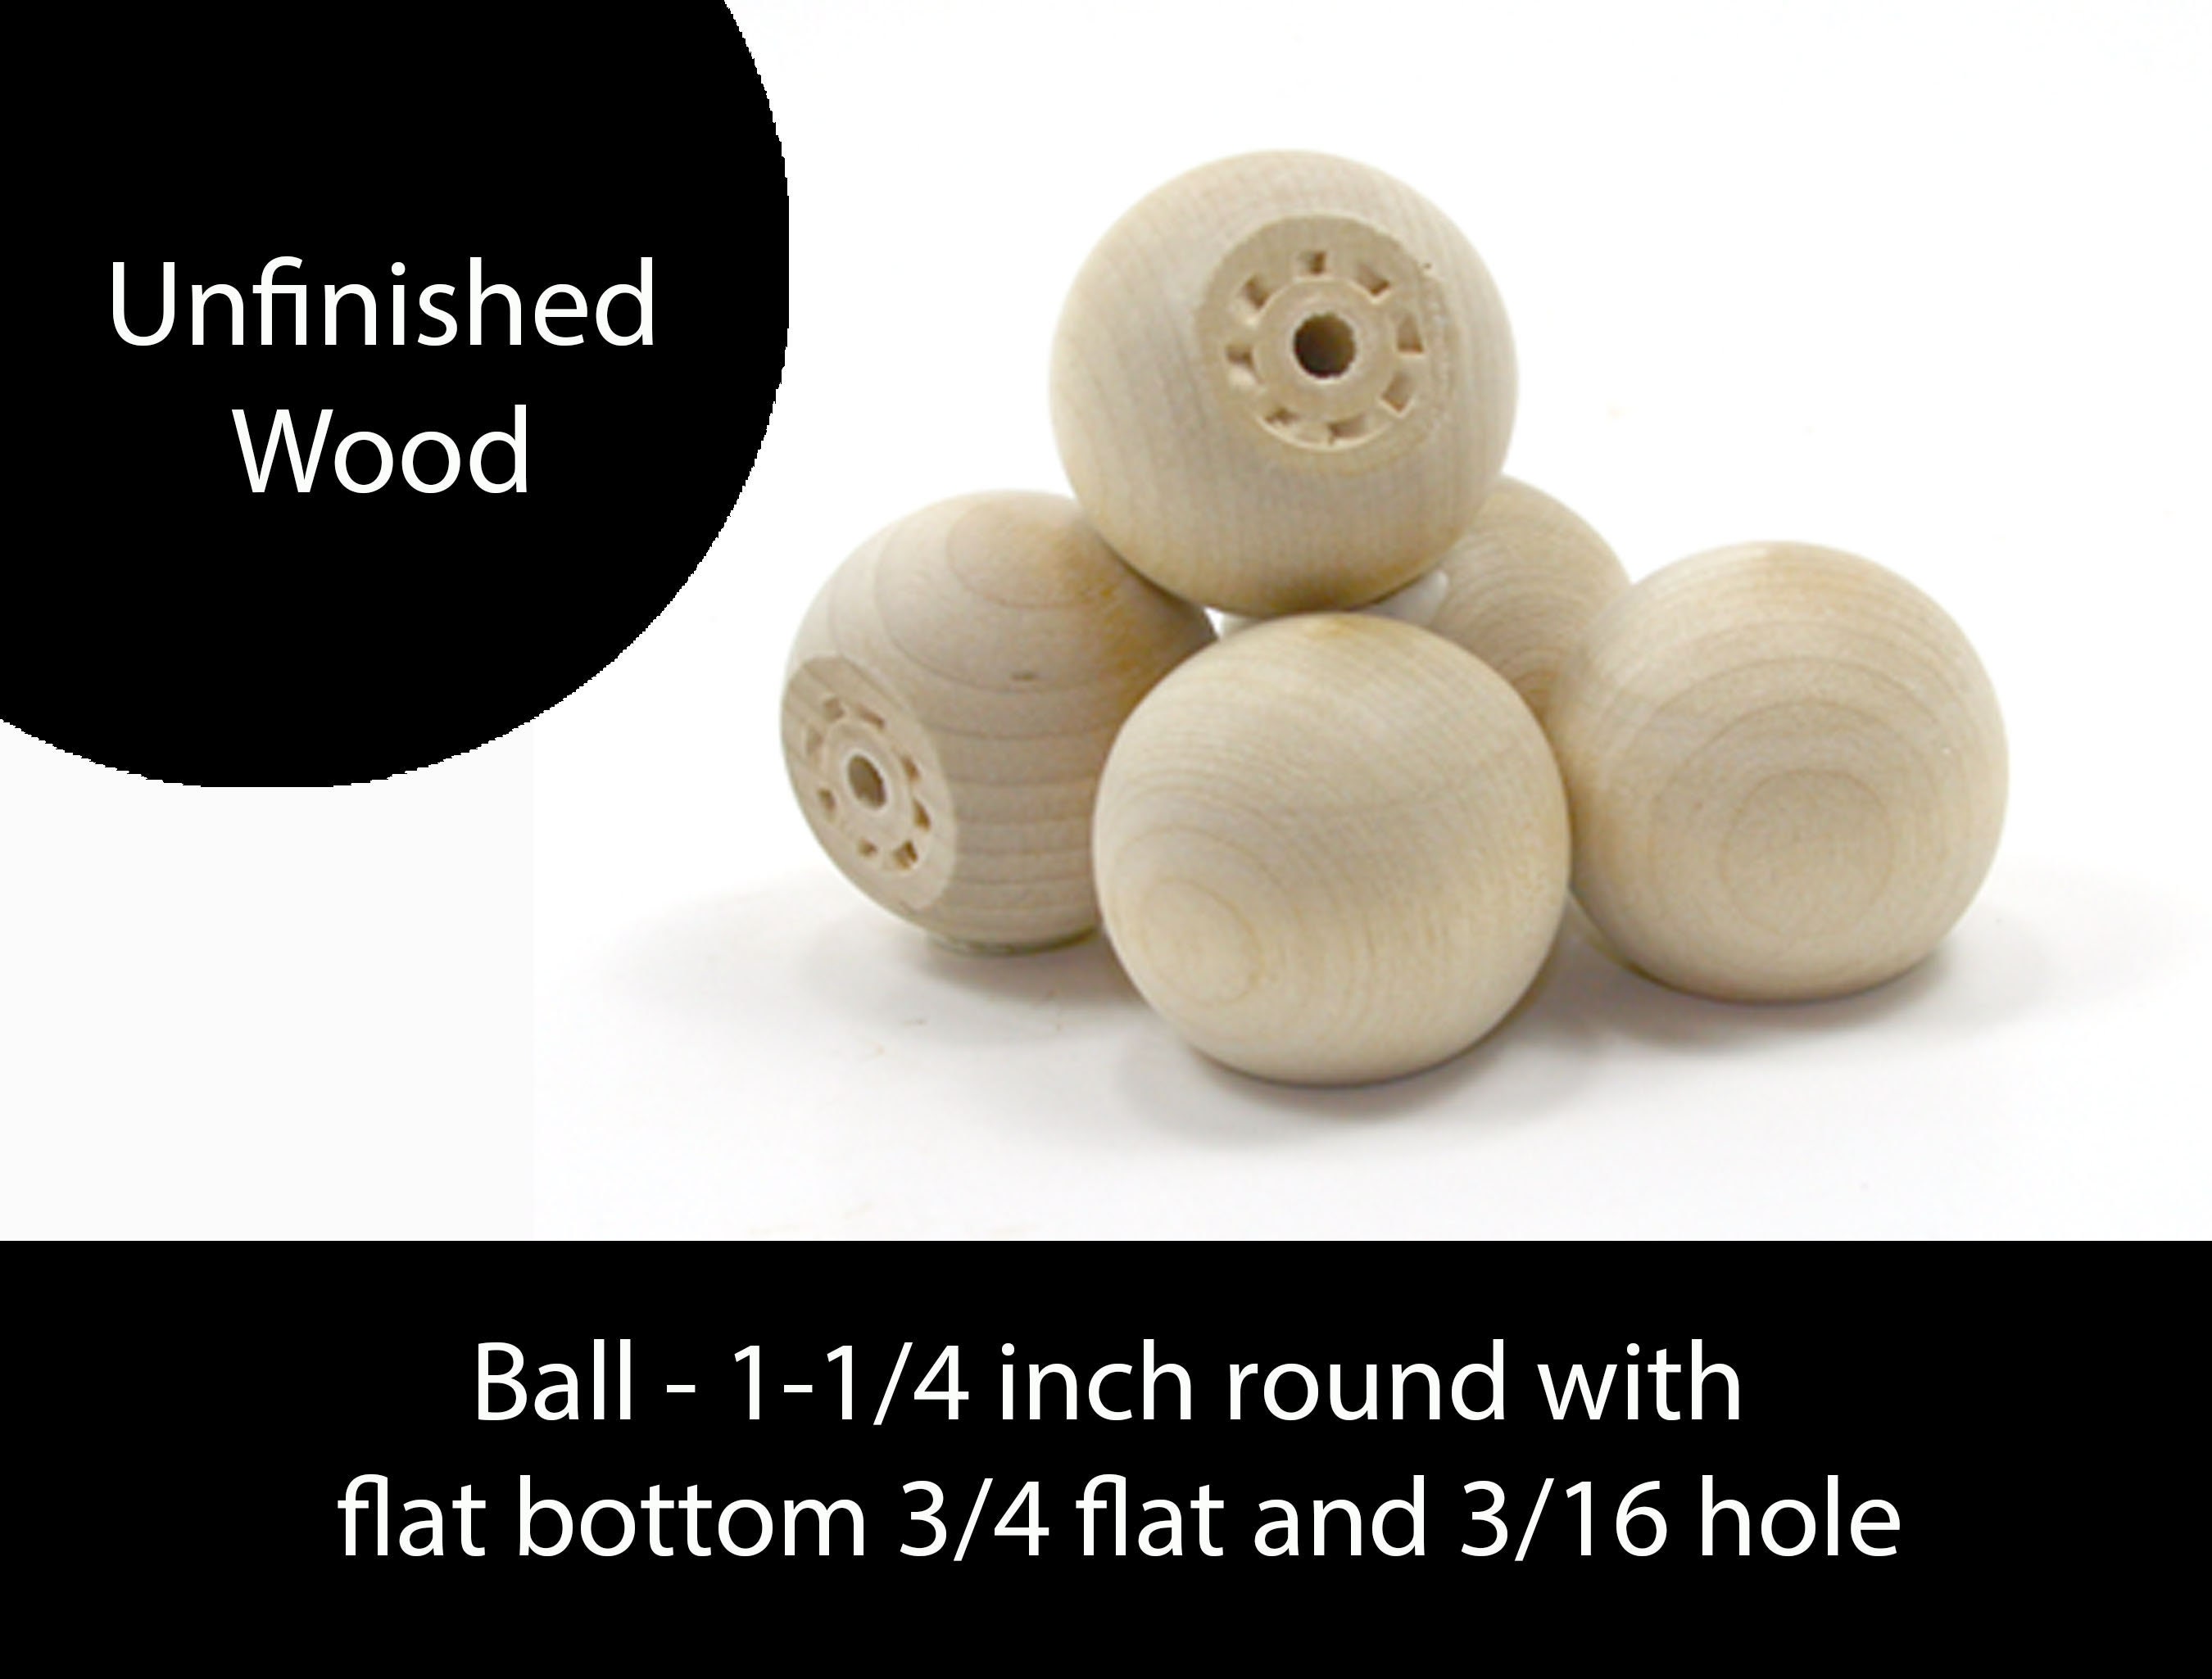 3 inch Wooden Round Ball, Bag of 25 Unfinished Natural Round Hardwood  Balls, Smooth Birch Balls, for Crafts and DIY Projects (3 inch Diameter) by  Woodpeckers 